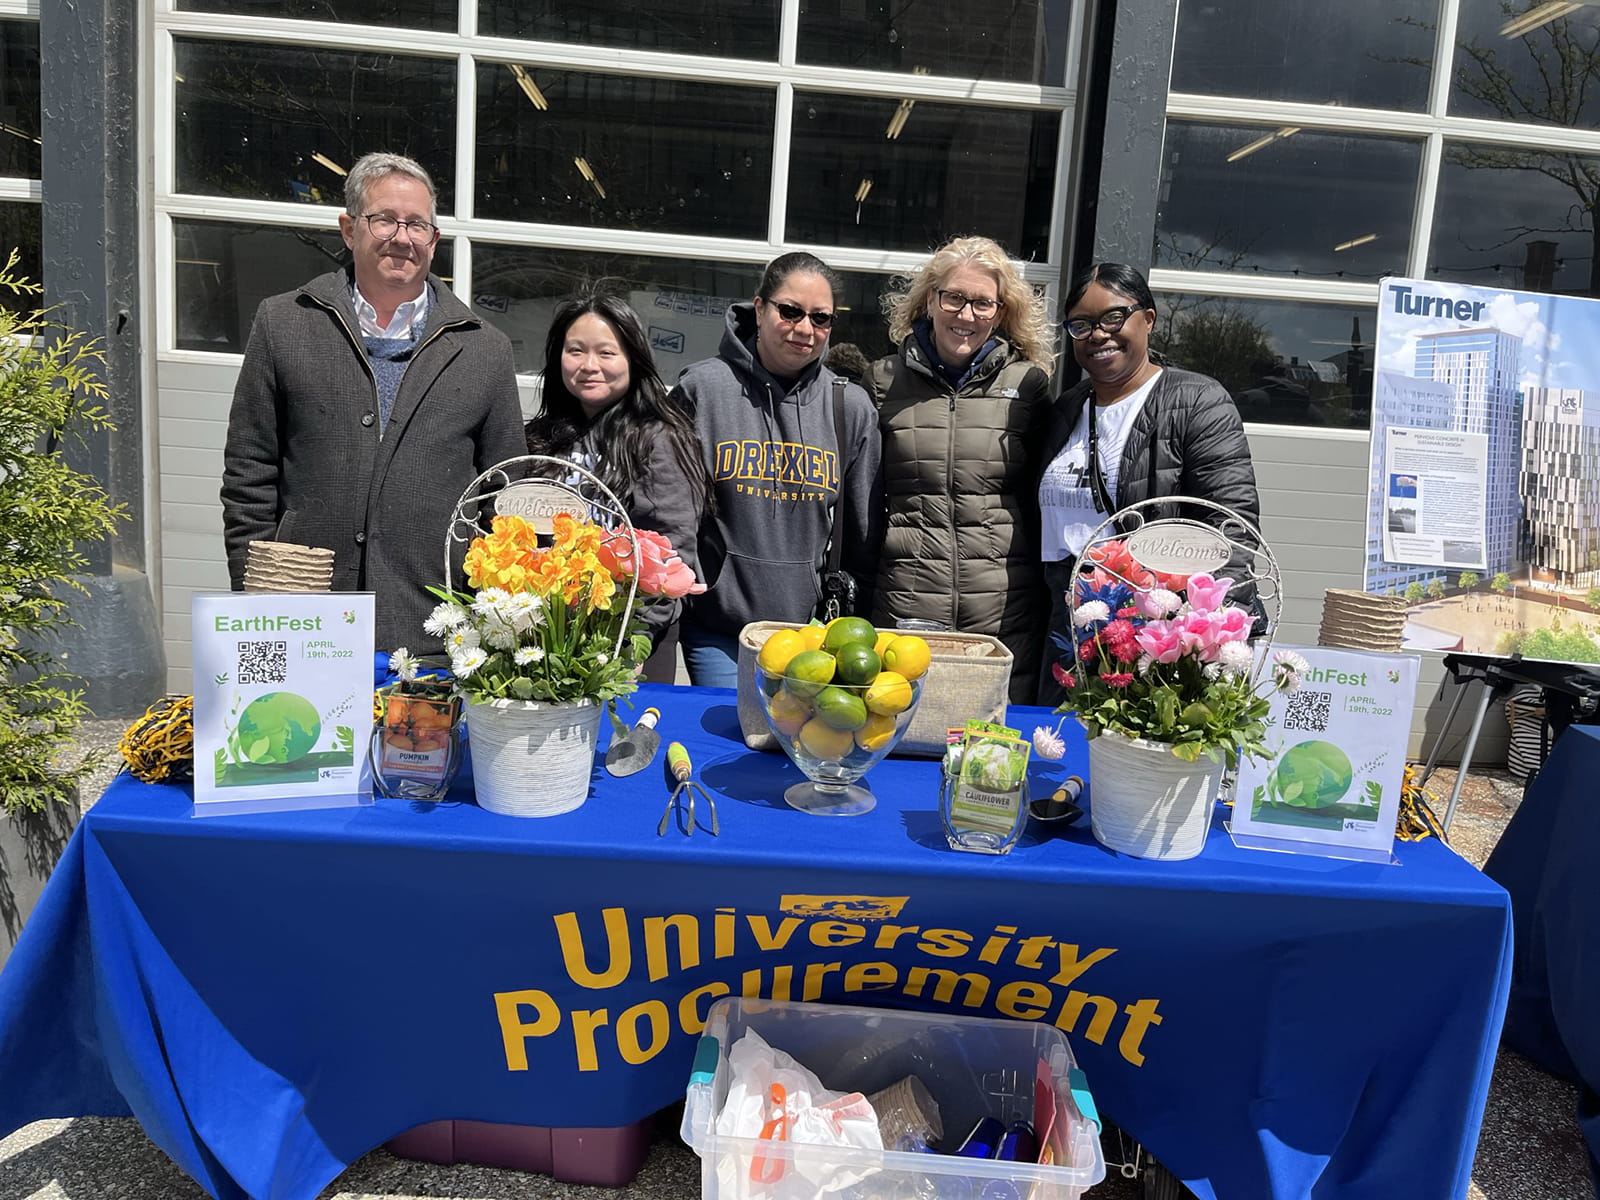 Members of University Procurement stand behind a table of flowers.